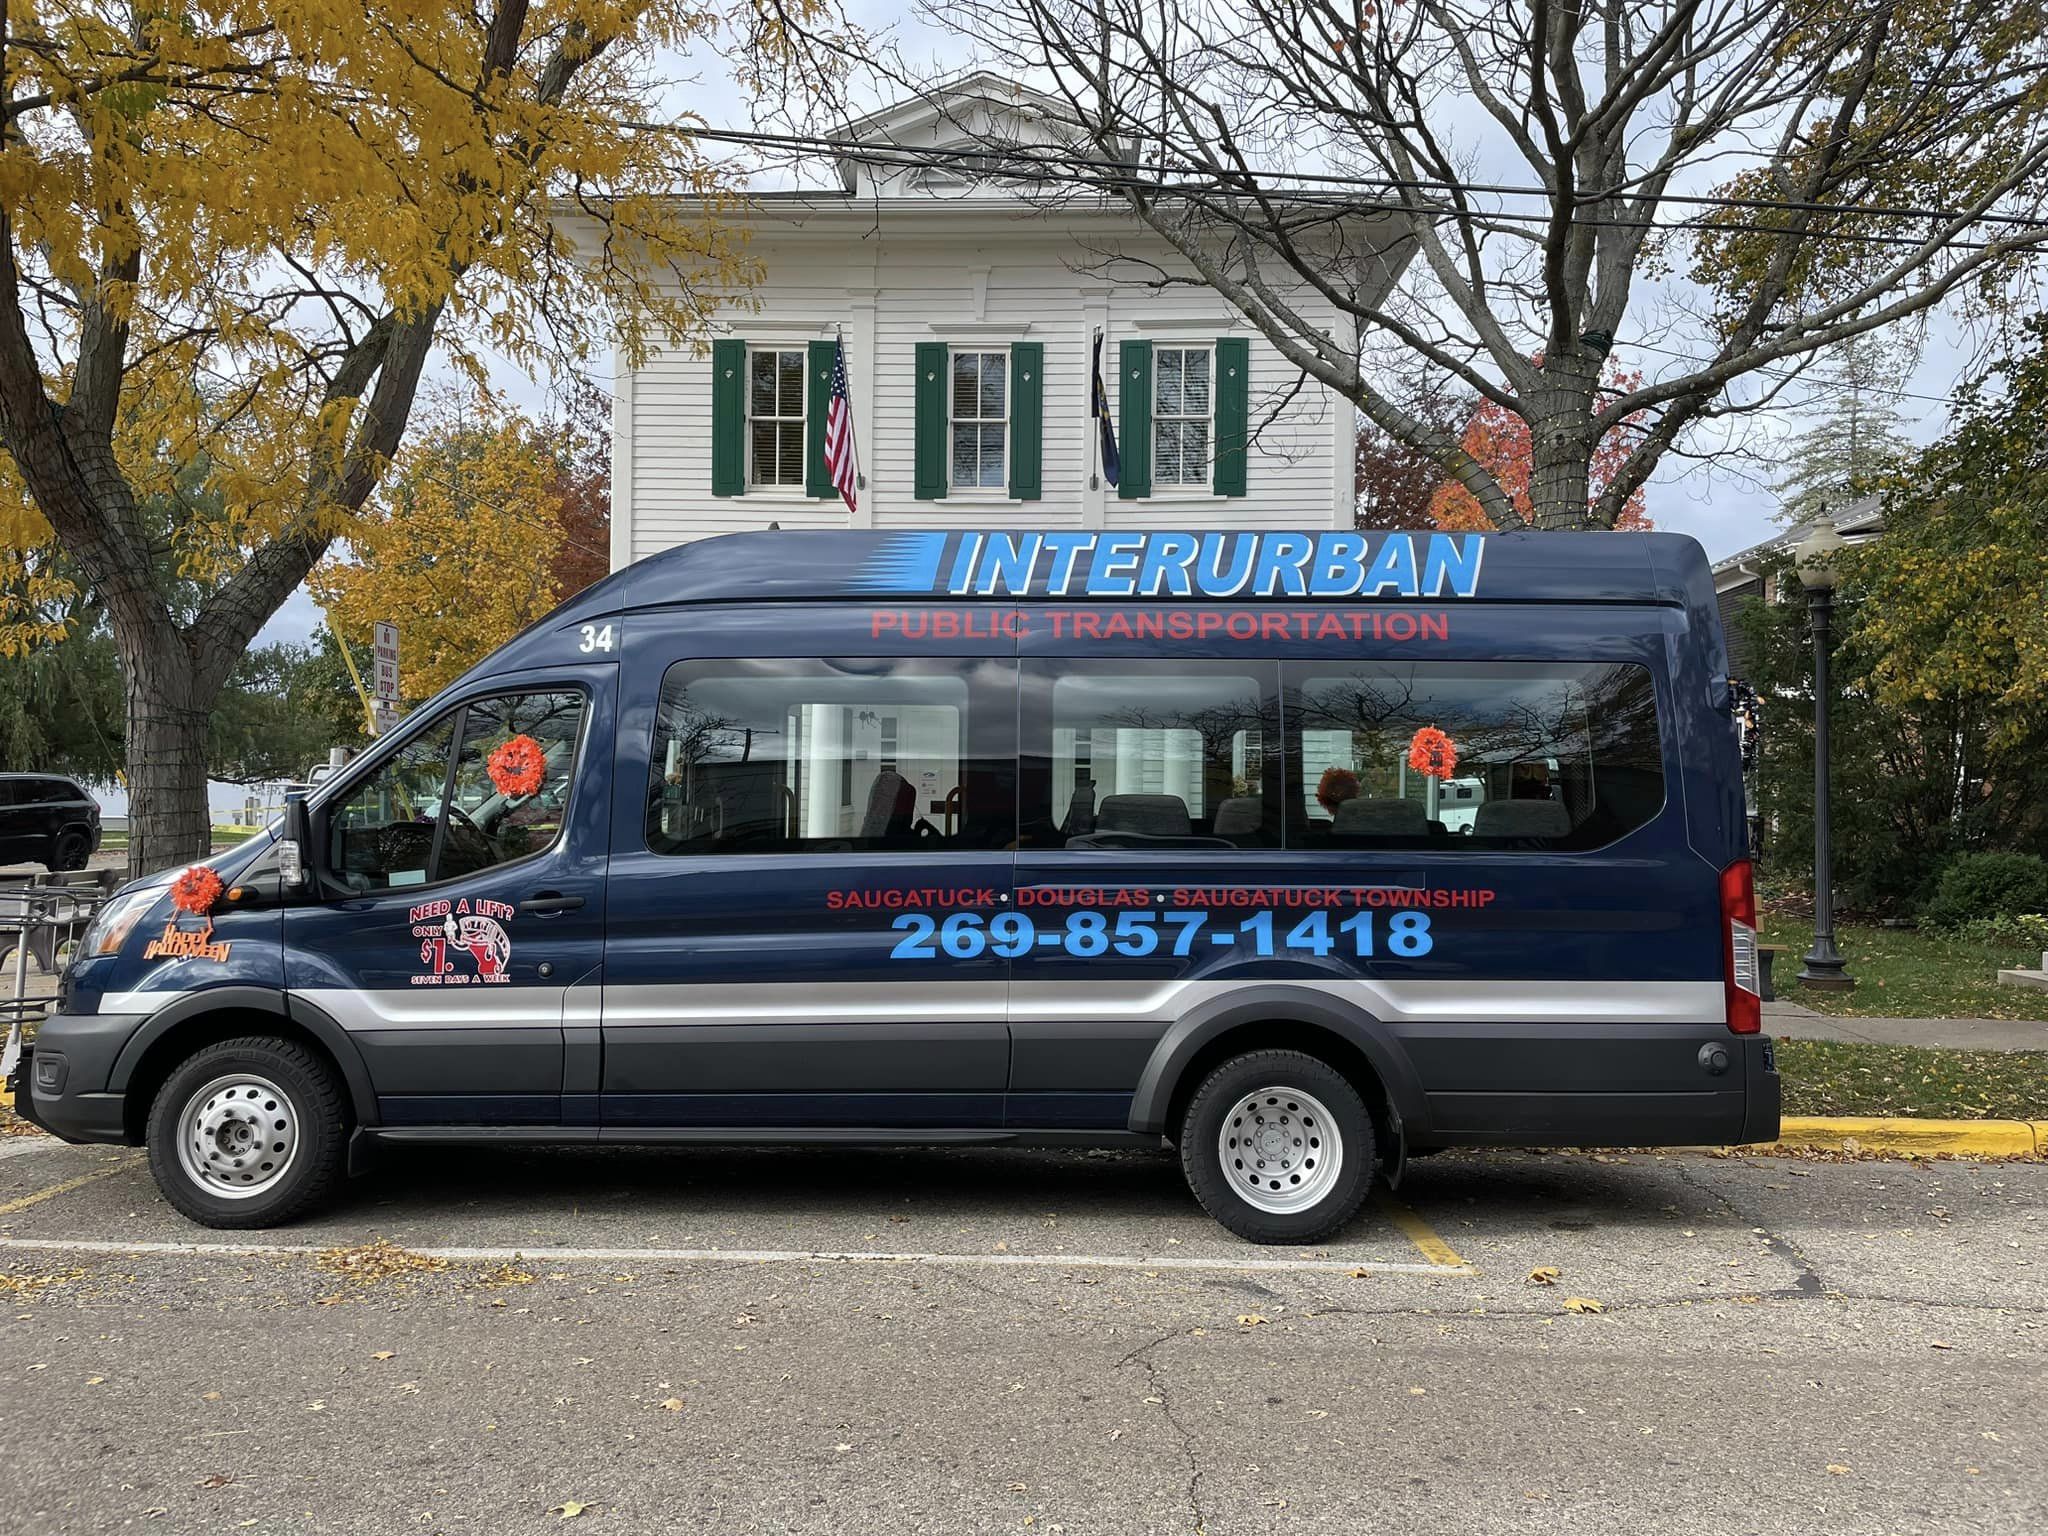 The Interurban bus parked on the street in downtown Saugatuck.